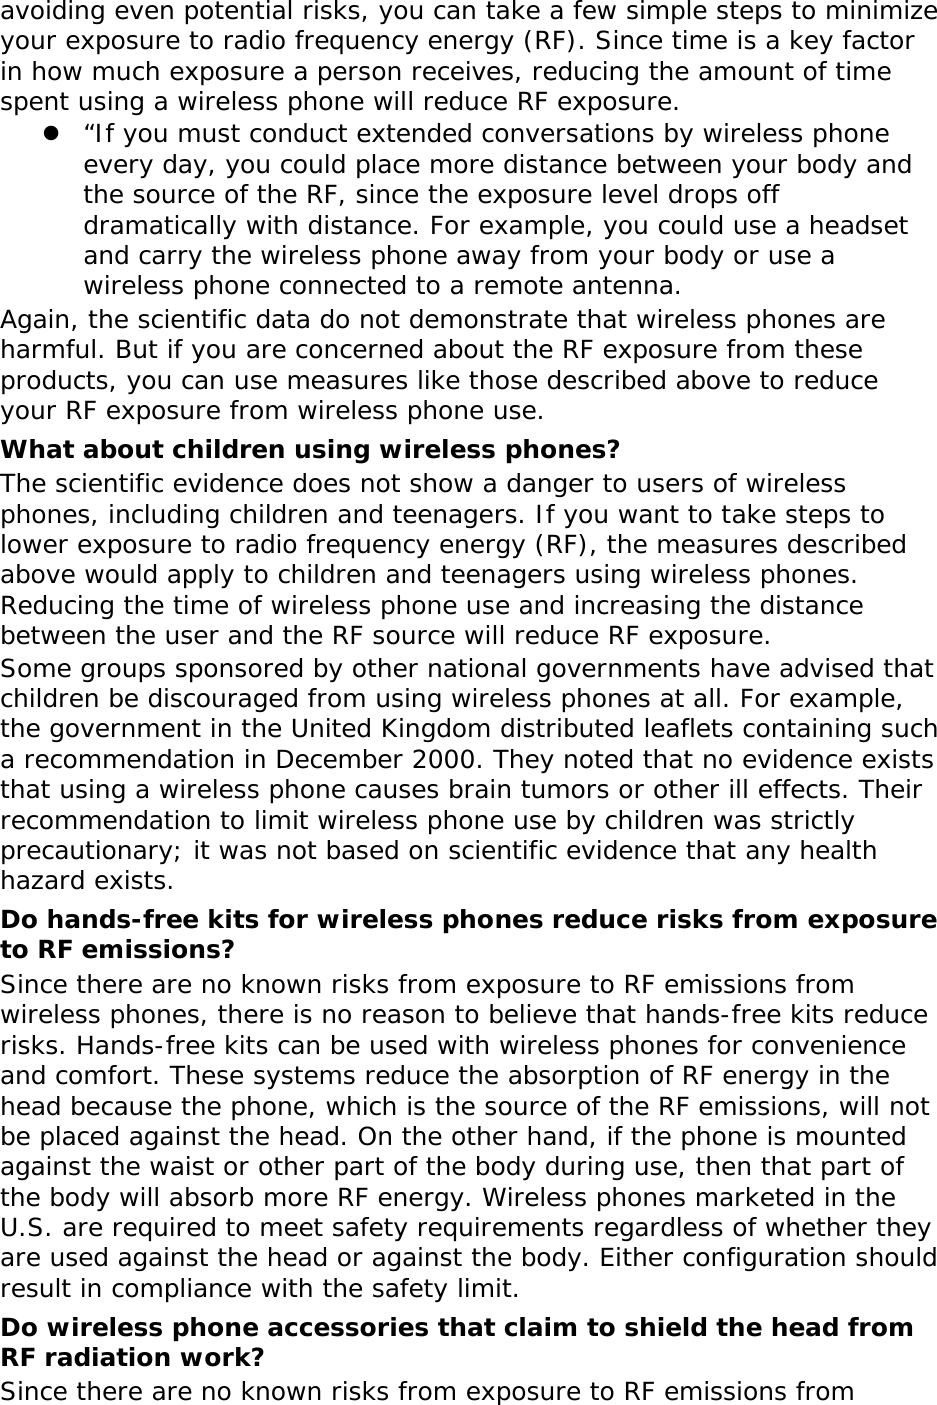 avoiding even potential risks, you can take a few simple steps to minimize your exposure to radio frequency energy (RF). Since time is a key factor in how much exposure a person receives, reducing the amount of time spent using a wireless phone will reduce RF exposure.  “If you must conduct extended conversations by wireless phone every day, you could place more distance between your body and the source of the RF, since the exposure level drops off dramatically with distance. For example, you could use a headset and carry the wireless phone away from your body or use a wireless phone connected to a remote antenna. Again, the scientific data do not demonstrate that wireless phones are harmful. But if you are concerned about the RF exposure from these products, you can use measures like those described above to reduce your RF exposure from wireless phone use. What about children using wireless phones? The scientific evidence does not show a danger to users of wireless phones, including children and teenagers. If you want to take steps to lower exposure to radio frequency energy (RF), the measures described above would apply to children and teenagers using wireless phones. Reducing the time of wireless phone use and increasing the distance between the user and the RF source will reduce RF exposure. Some groups sponsored by other national governments have advised that children be discouraged from using wireless phones at all. For example, the government in the United Kingdom distributed leaflets containing such a recommendation in December 2000. They noted that no evidence exists that using a wireless phone causes brain tumors or other ill effects. Their recommendation to limit wireless phone use by children was strictly precautionary; it was not based on scientific evidence that any health hazard exists.  Do hands-free kits for wireless phones reduce risks from exposure to RF emissions? Since there are no known risks from exposure to RF emissions from wireless phones, there is no reason to believe that hands-free kits reduce risks. Hands-free kits can be used with wireless phones for convenience and comfort. These systems reduce the absorption of RF energy in the head because the phone, which is the source of the RF emissions, will not be placed against the head. On the other hand, if the phone is mounted against the waist or other part of the body during use, then that part of the body will absorb more RF energy. Wireless phones marketed in the U.S. are required to meet safety requirements regardless of whether they are used against the head or against the body. Either configuration should result in compliance with the safety limit. Do wireless phone accessories that claim to shield the head from RF radiation work? Since there are no known risks from exposure to RF emissions from 